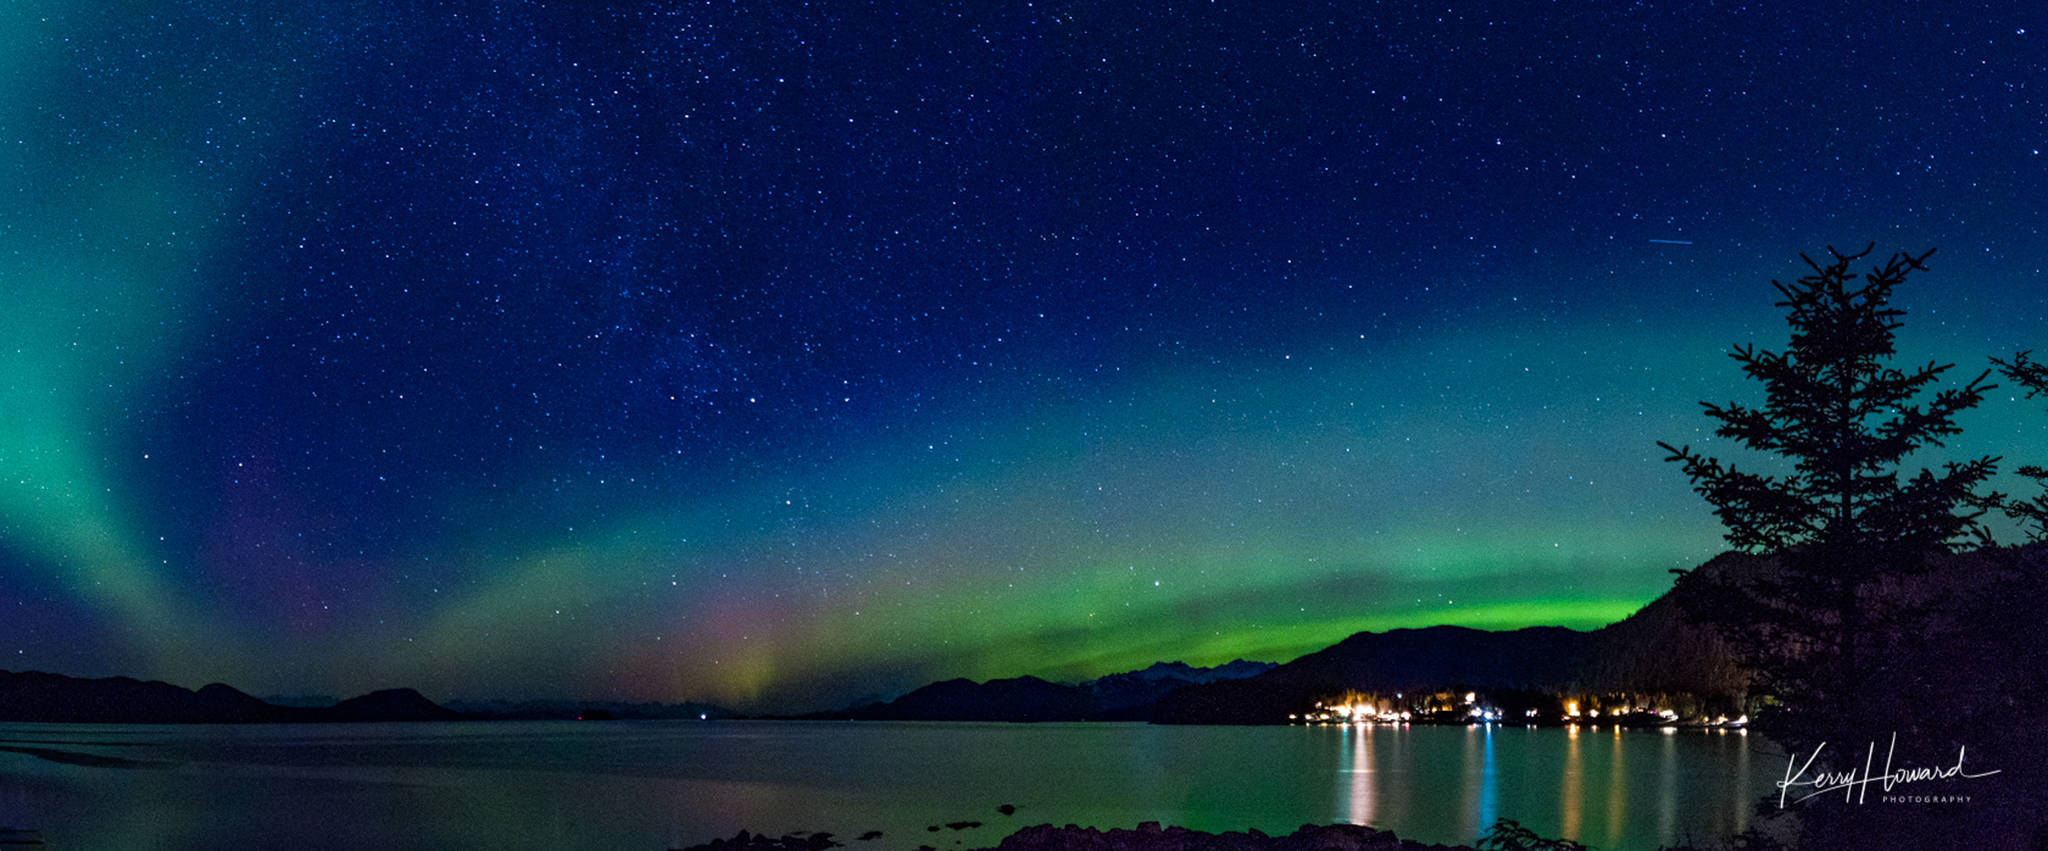 Northern lights dance on the horizon from Lena Cove on Feb. 28, 2019. (Courtesy Photo | Kerry Howard)